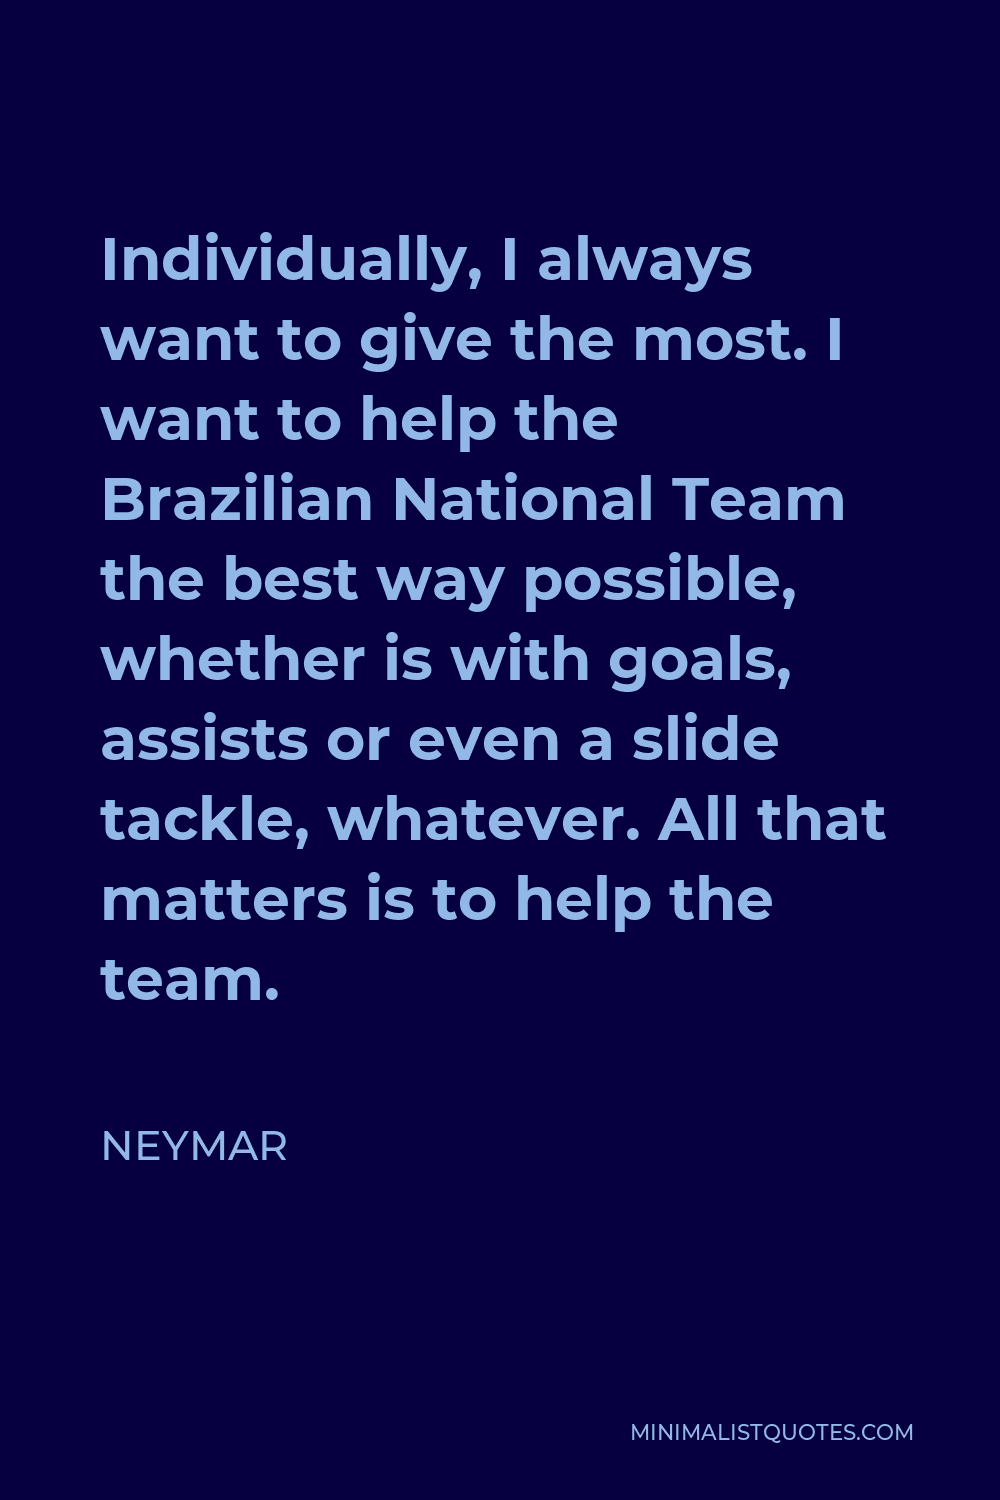 Neymar Quote - Individually, I always want to give the most.